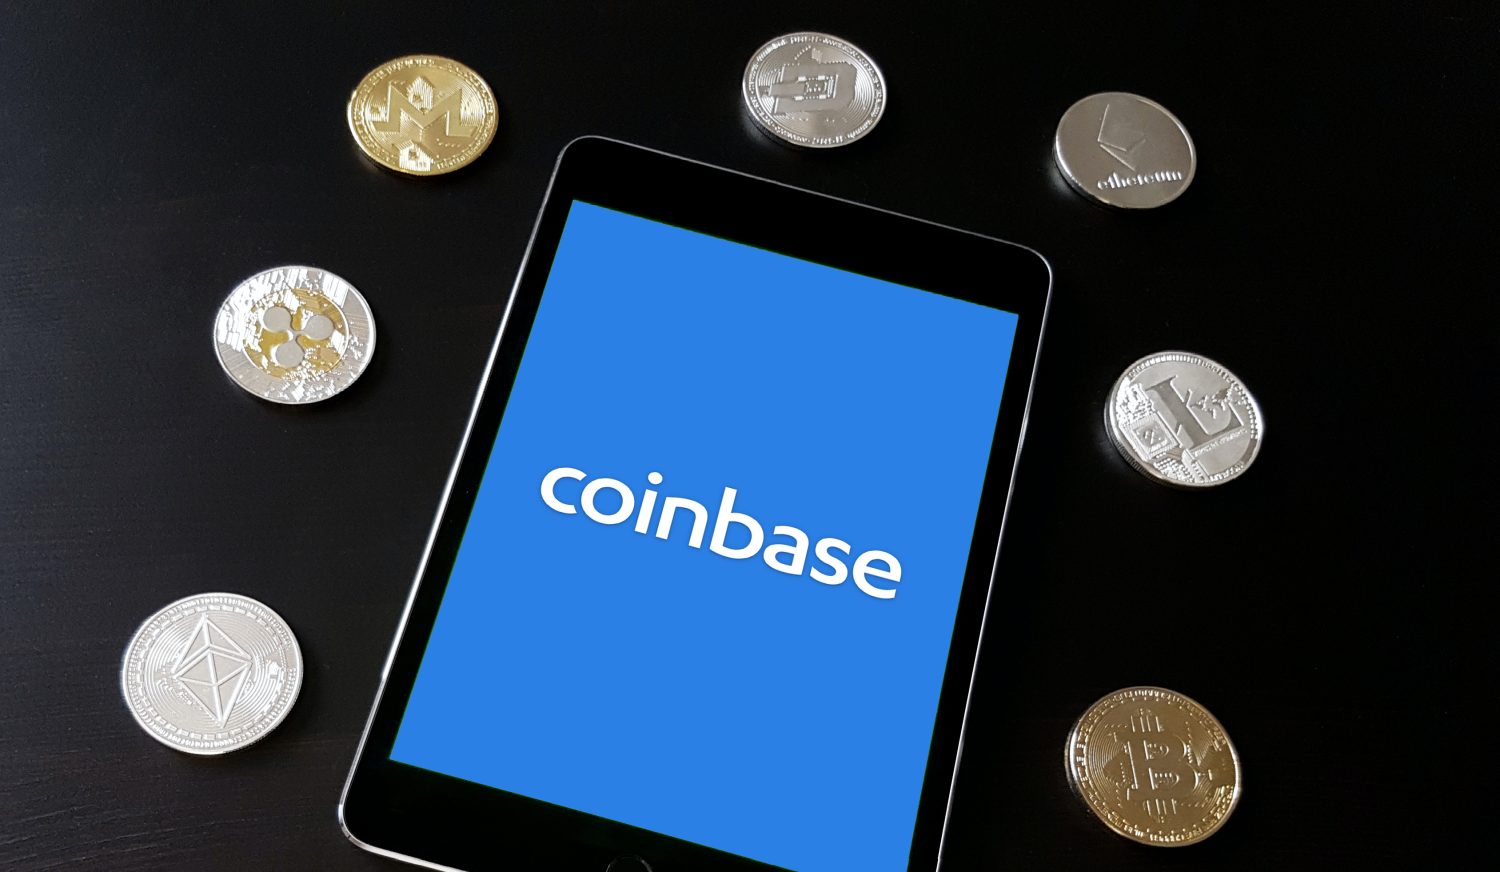 Coinbase Adds Browser Startup Brave’s Token To Pro Trading Platform